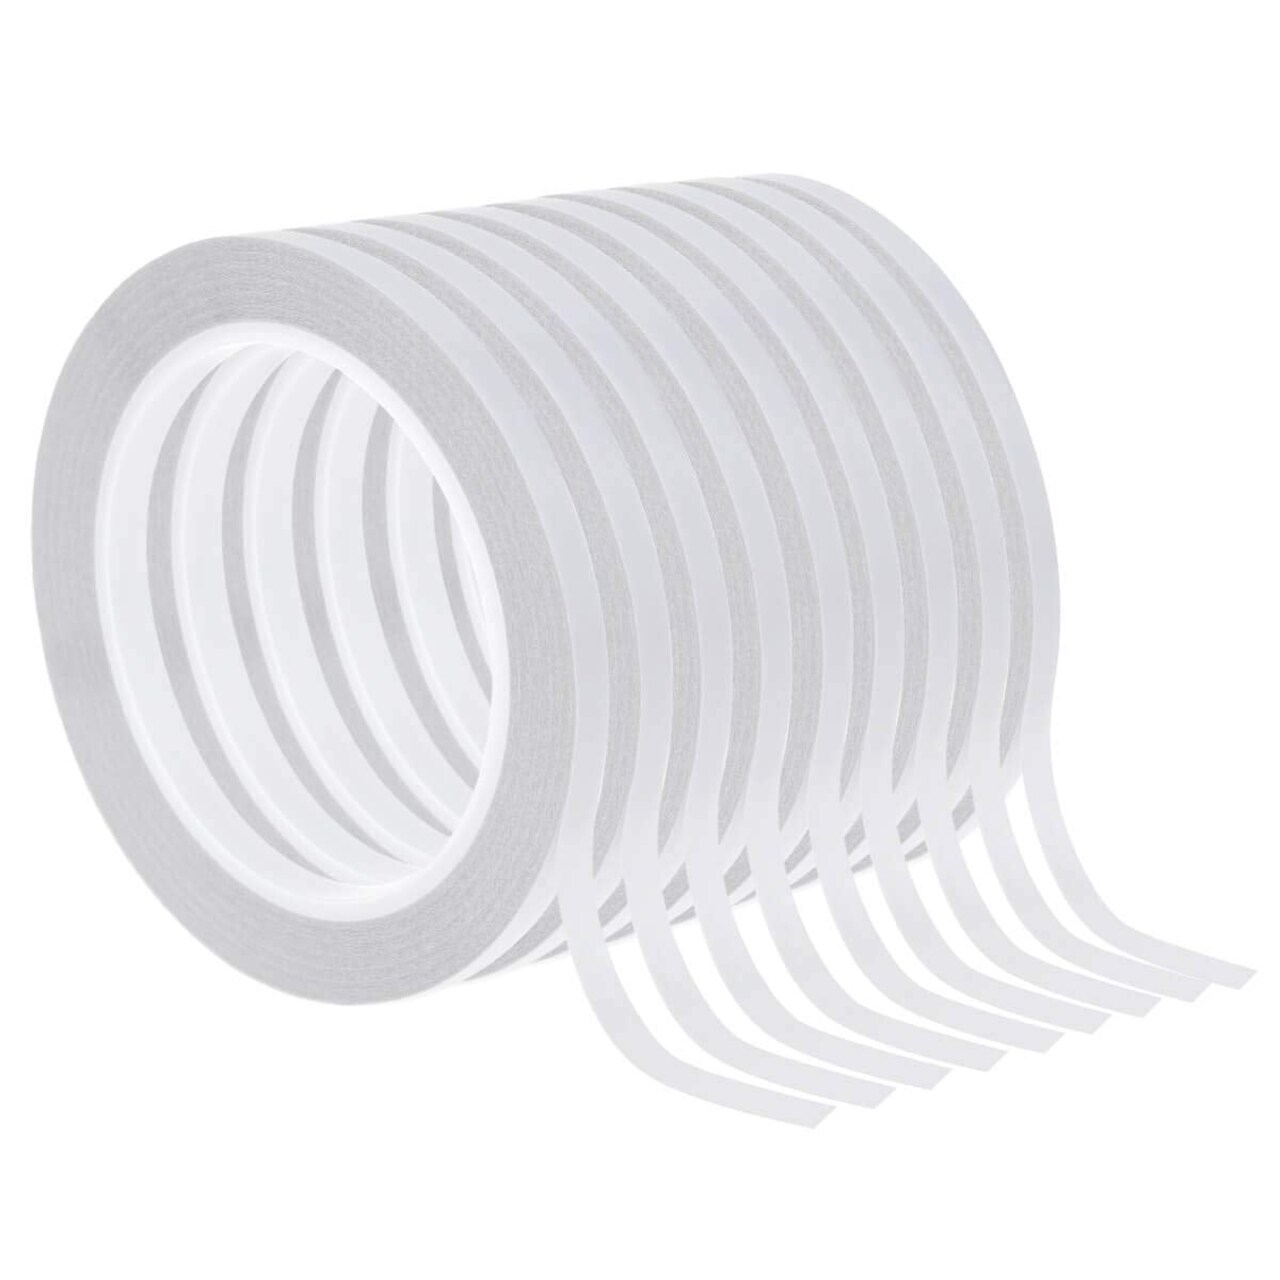 Double Sided Adhesive Tape, 9 Rolls Double-Side Craft Tape for